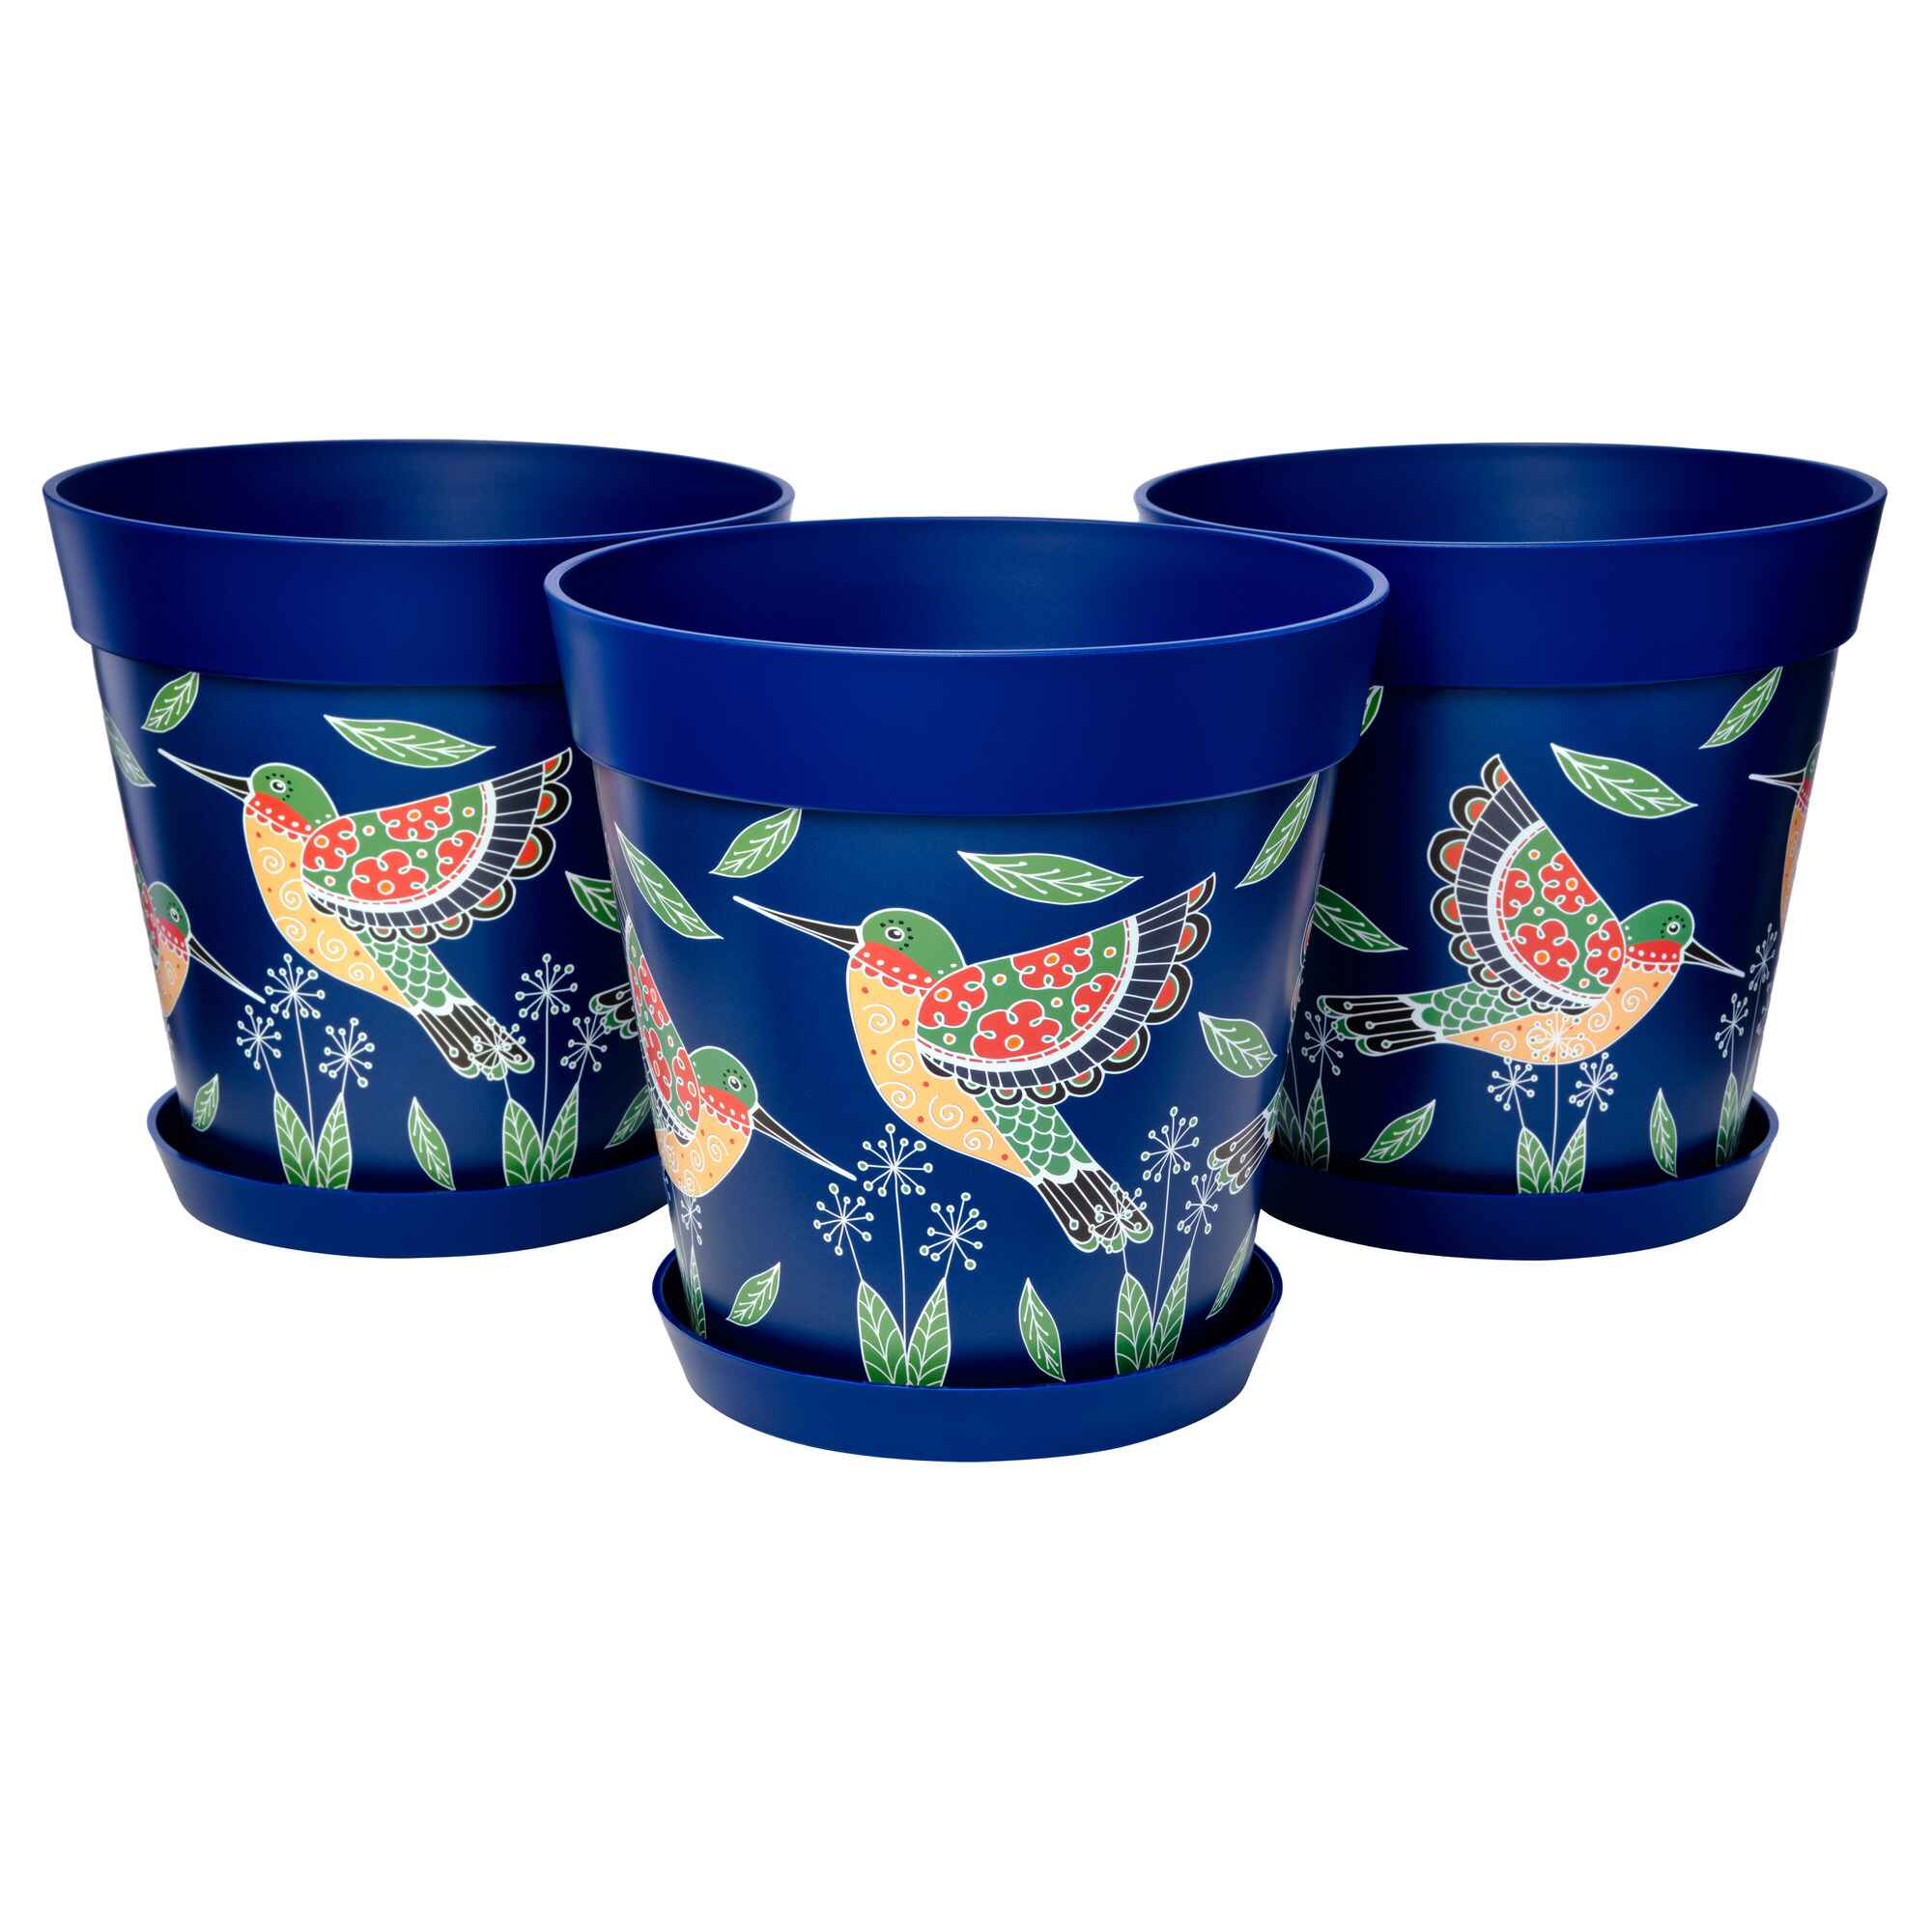 Picture of 3 Large 25cm Blue Hummingbird Pattern Plastic Indoor/Outdoor Flowerpots and Saucers